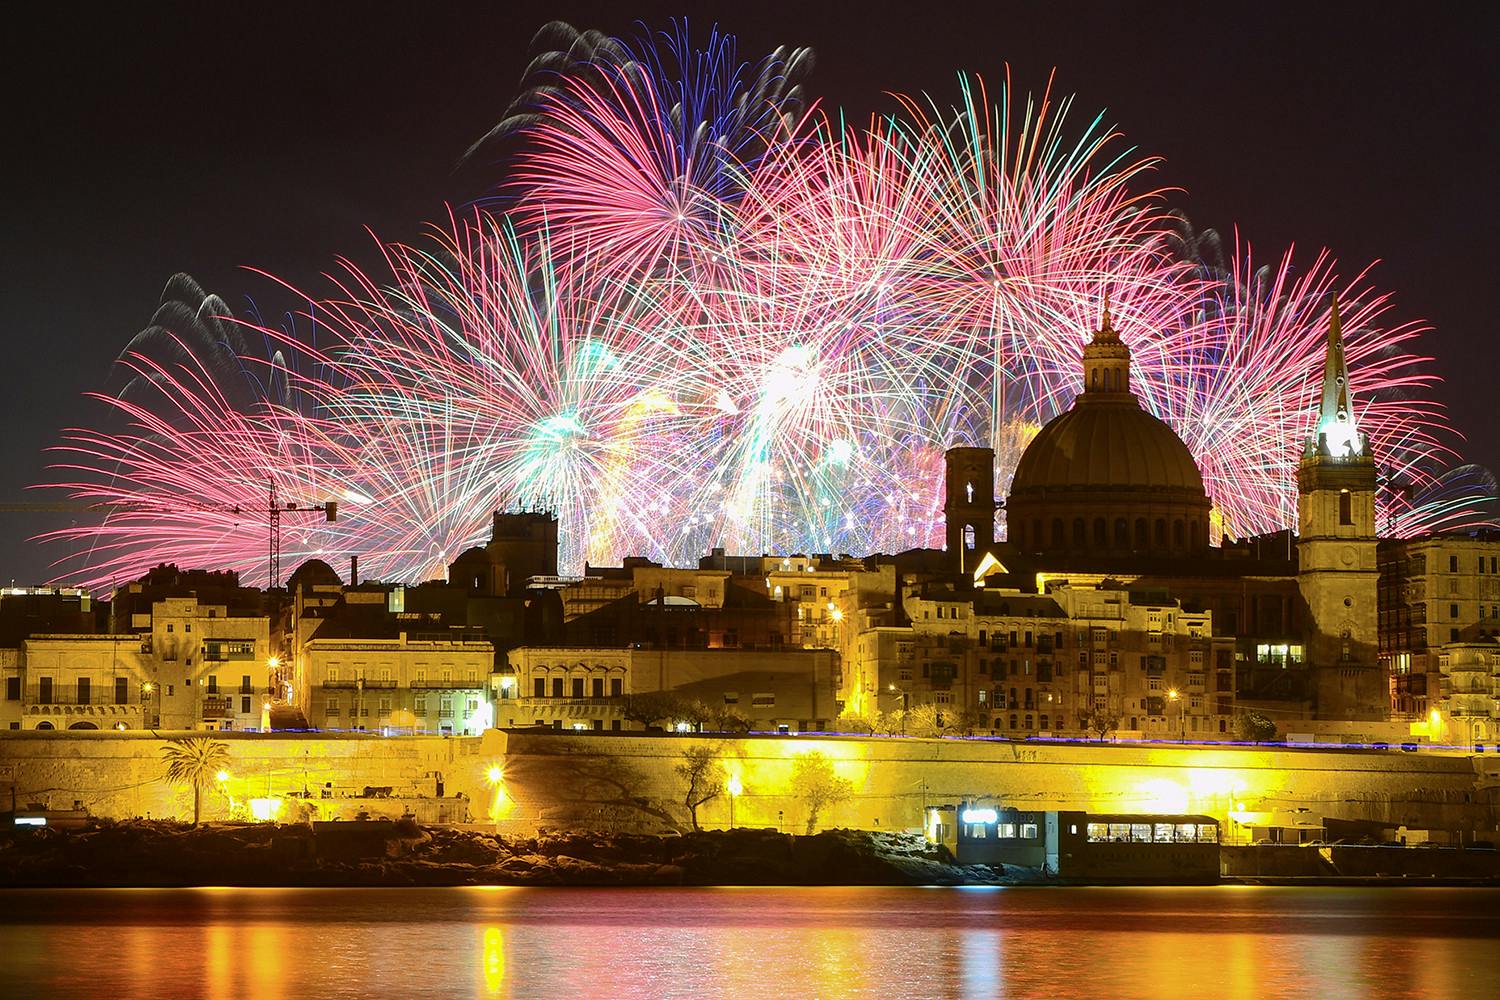 New Year's Day in Malta